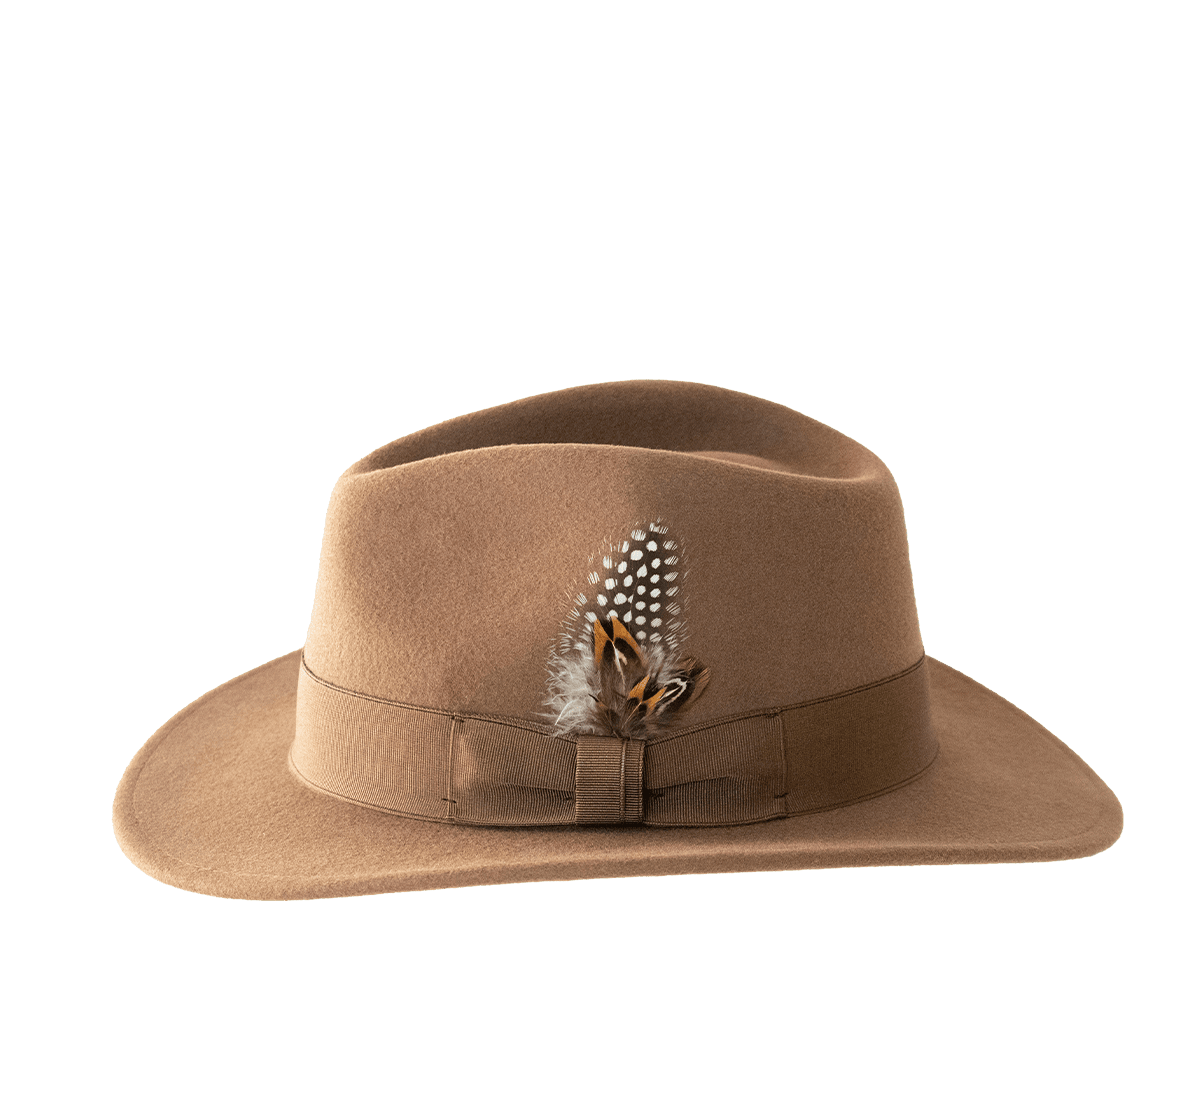 Your new favourite casual hat! Smooth to the touch, packable, and adjustable (Velcro strap), this crown will surely become one of your go to’s, no matter where you are. Going fishing, or getting on a plane, this hat can easily become your new best friend!